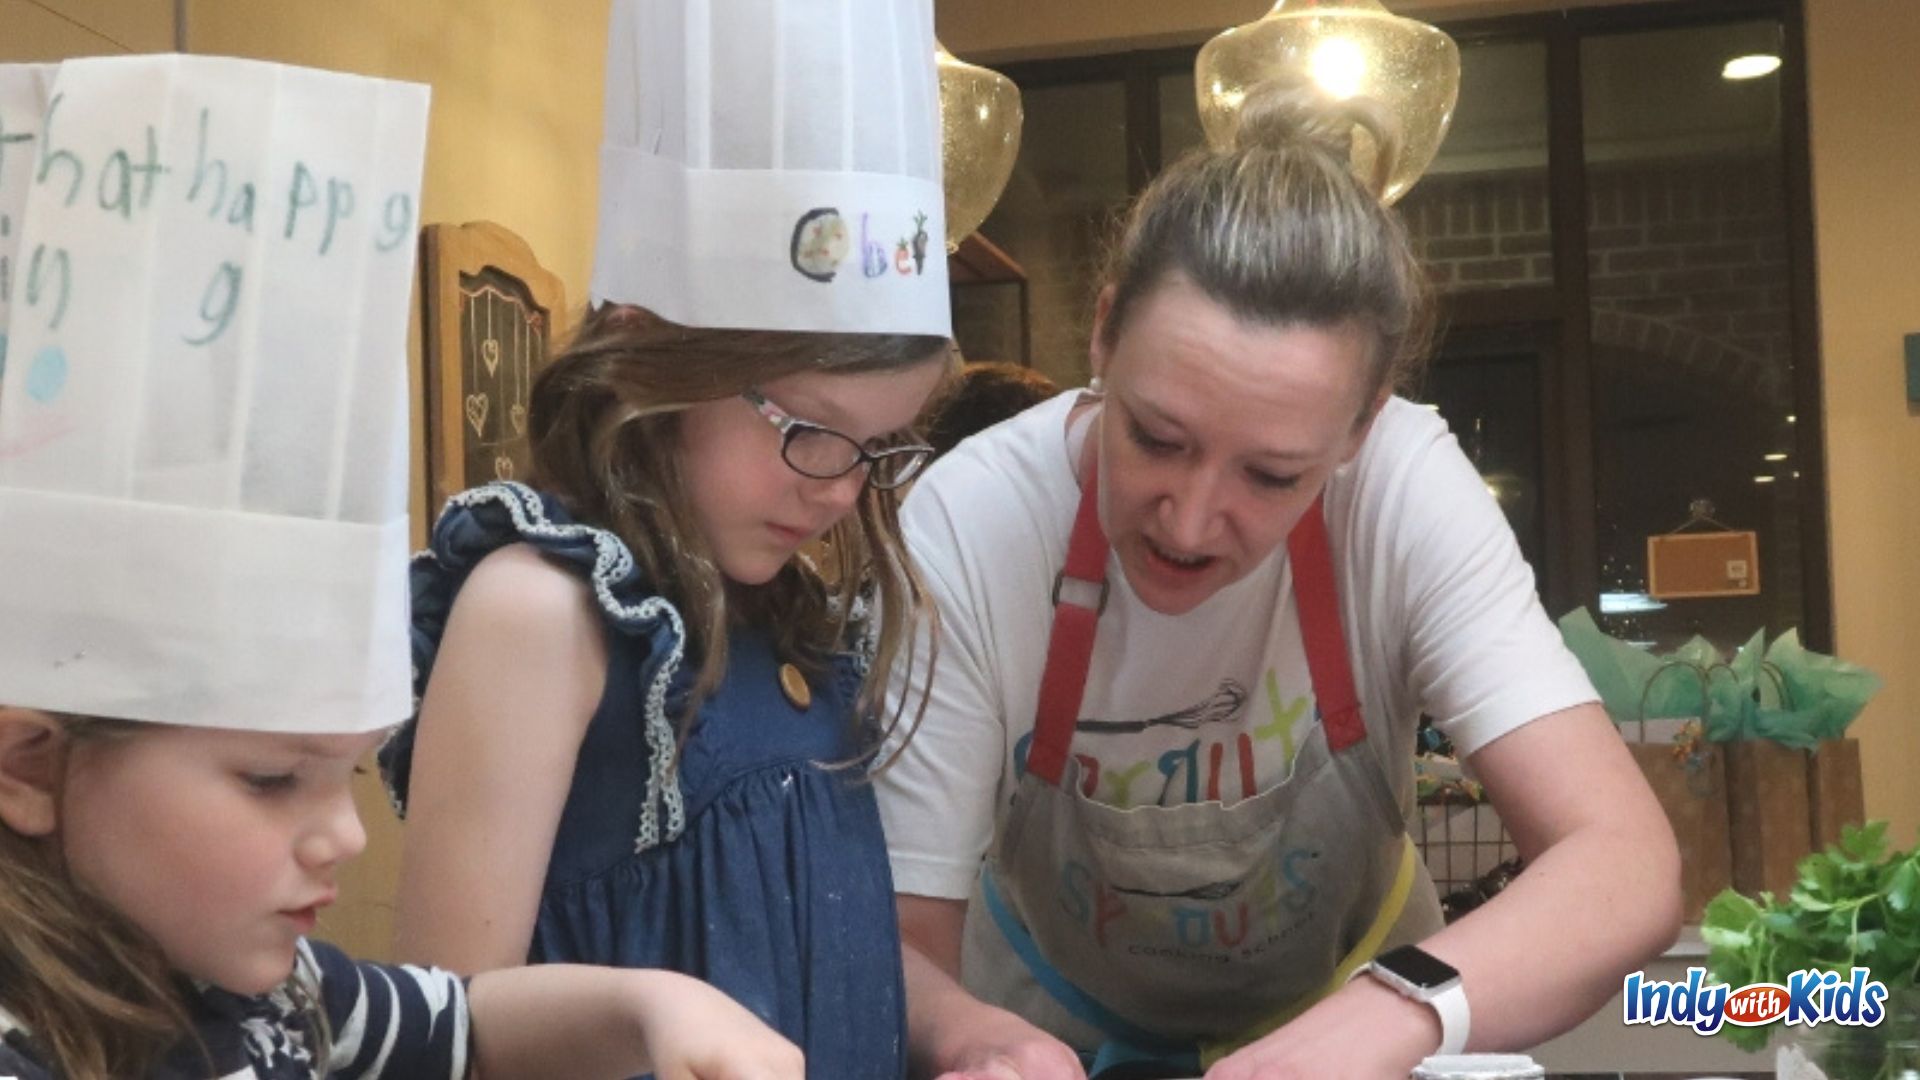 Kids Cooking Classes Near Me: The registration fee for Maggiano's kids' classes includes a breakfast buffet.